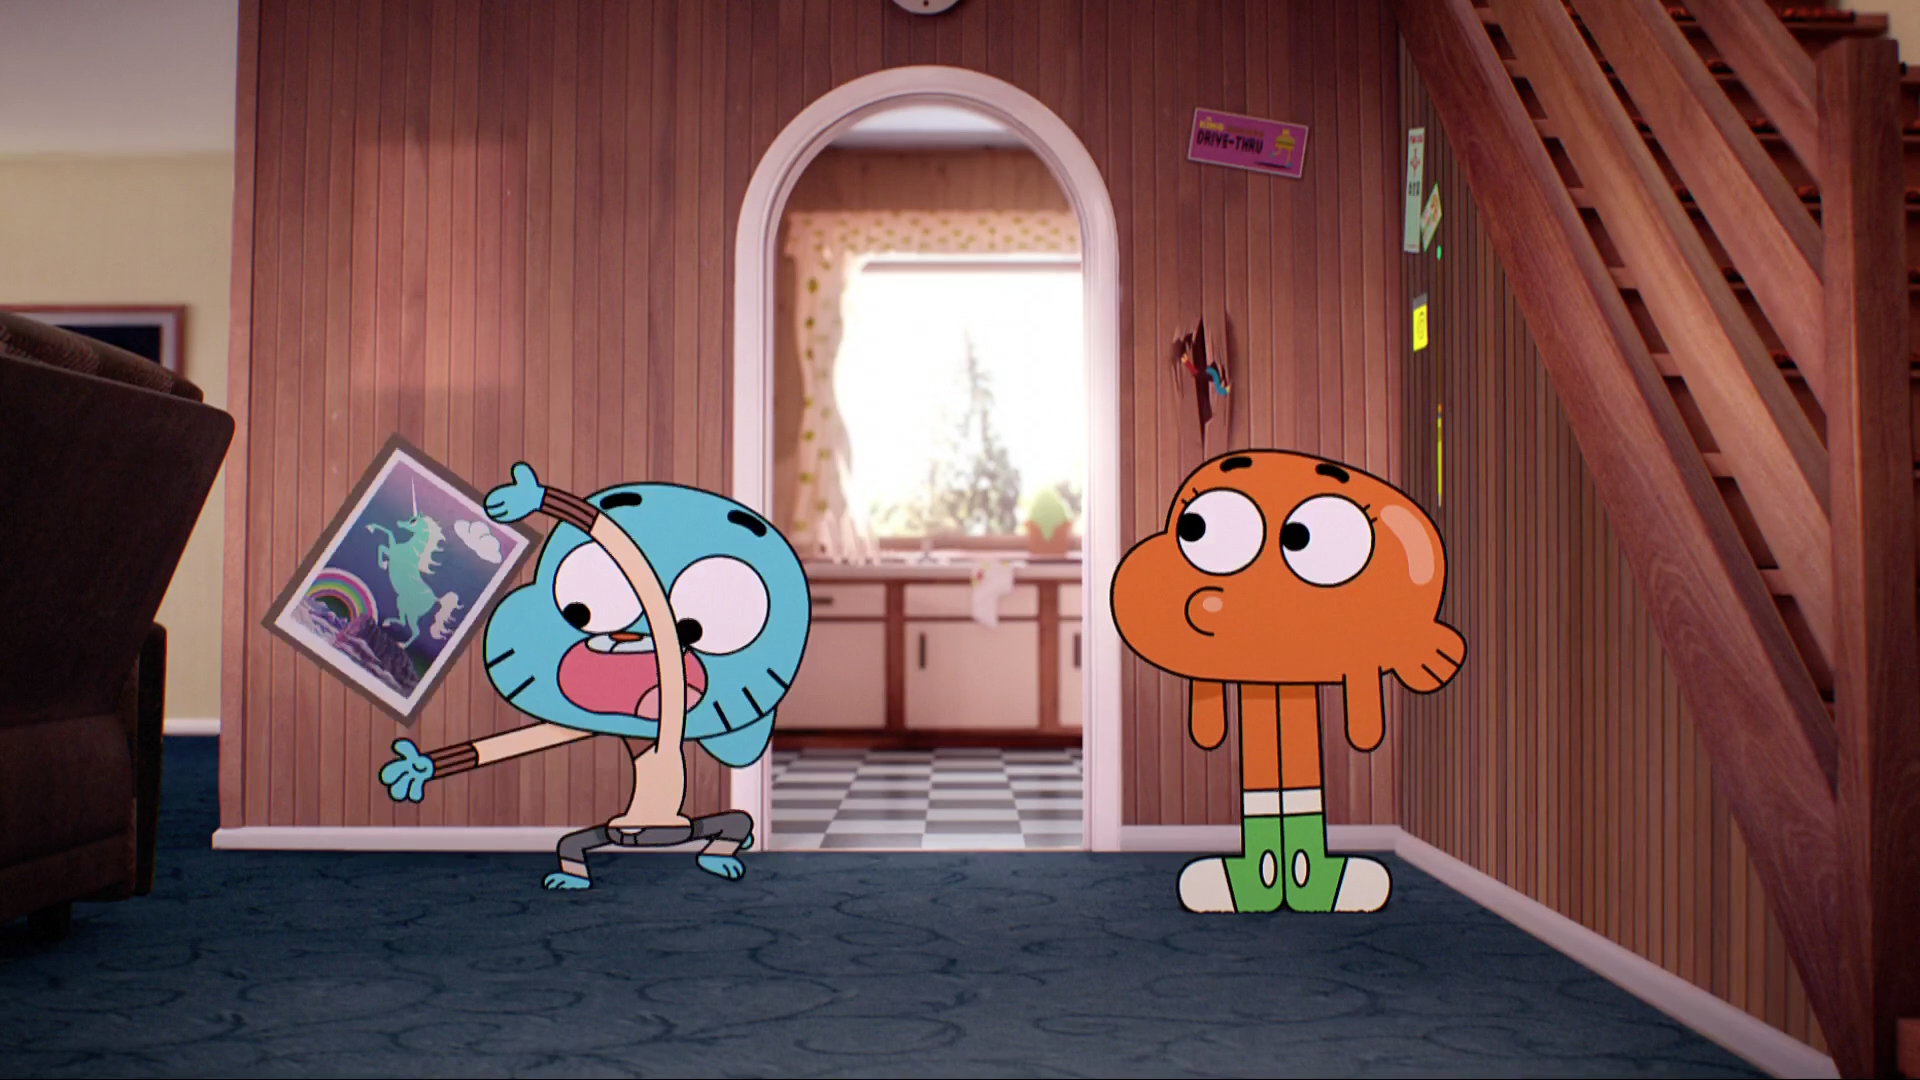 Image Nobody54 Png The Amazing World Of Gumball Wiki Fandom Powered By Wikia